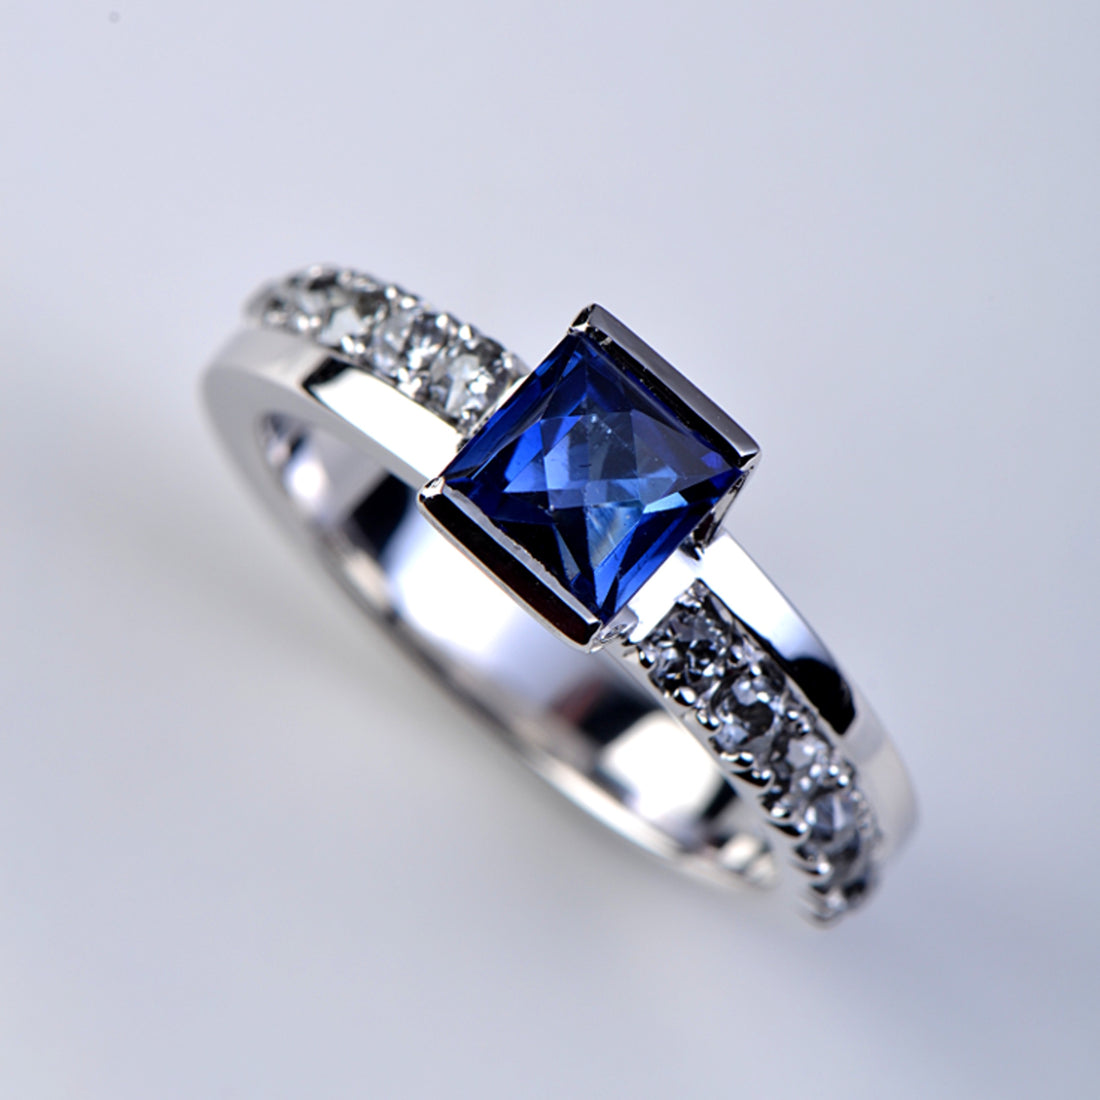 Sapphire ring remodelled into a contemporary design